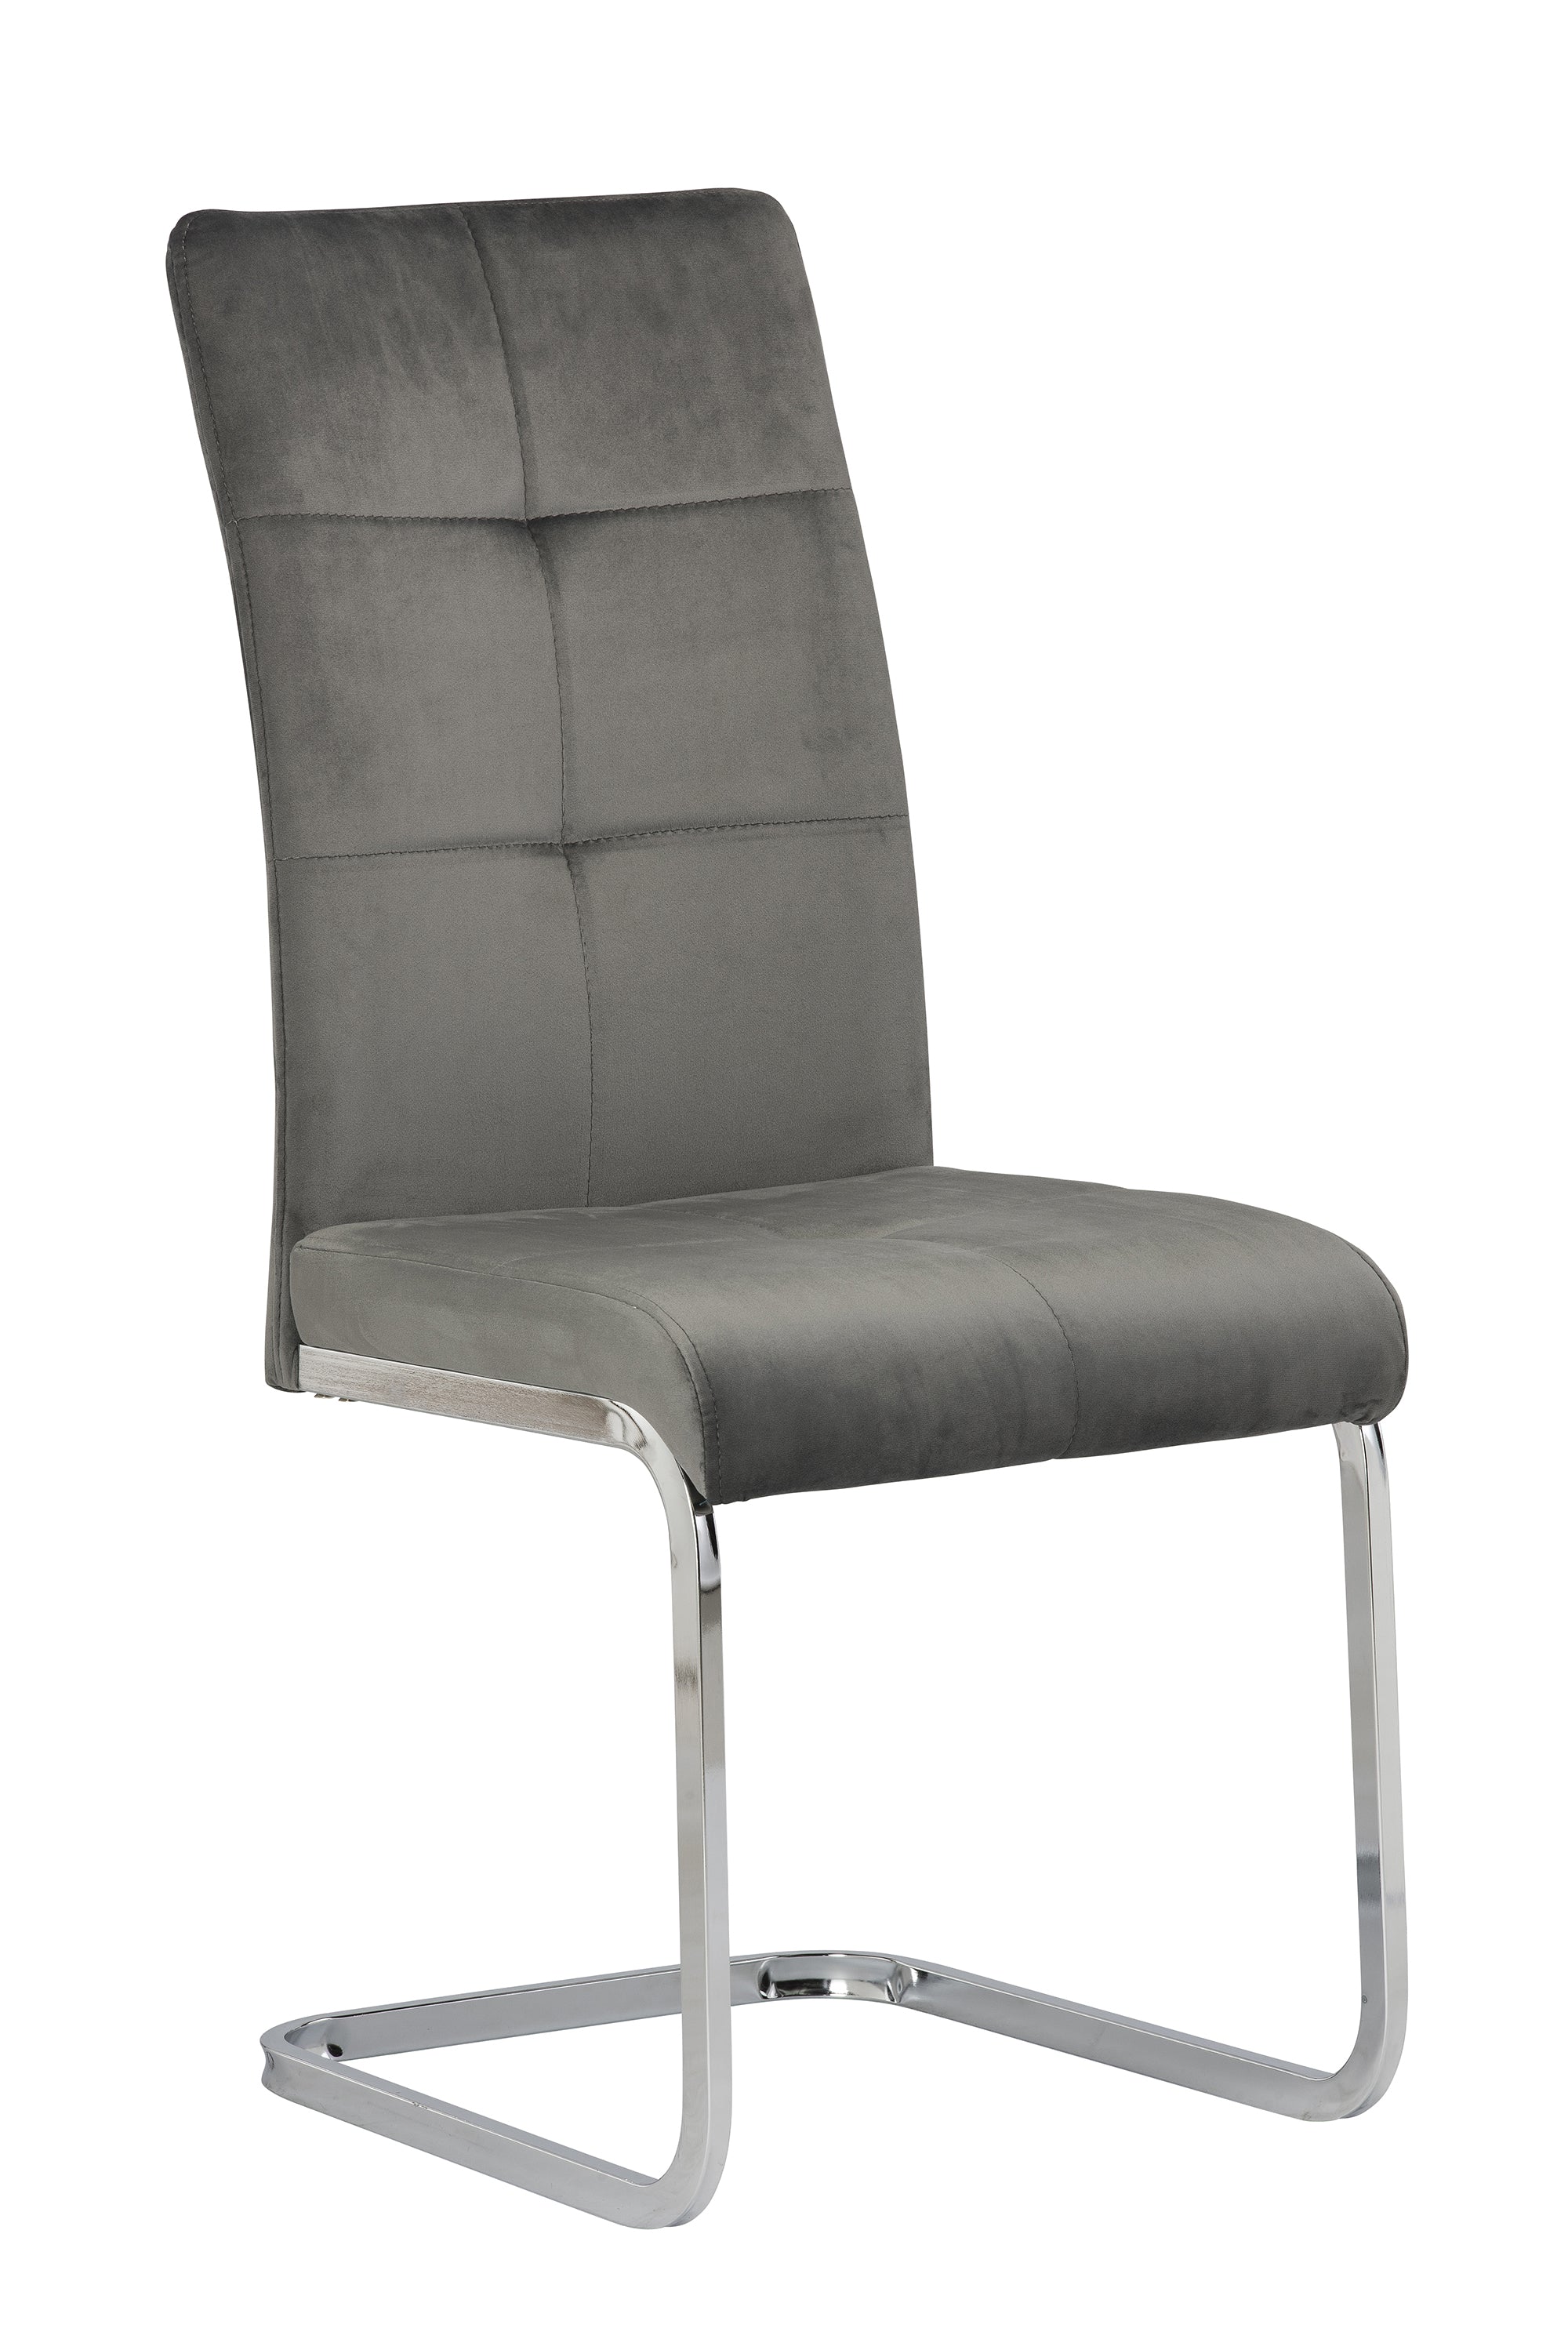 pu leather dining chairs